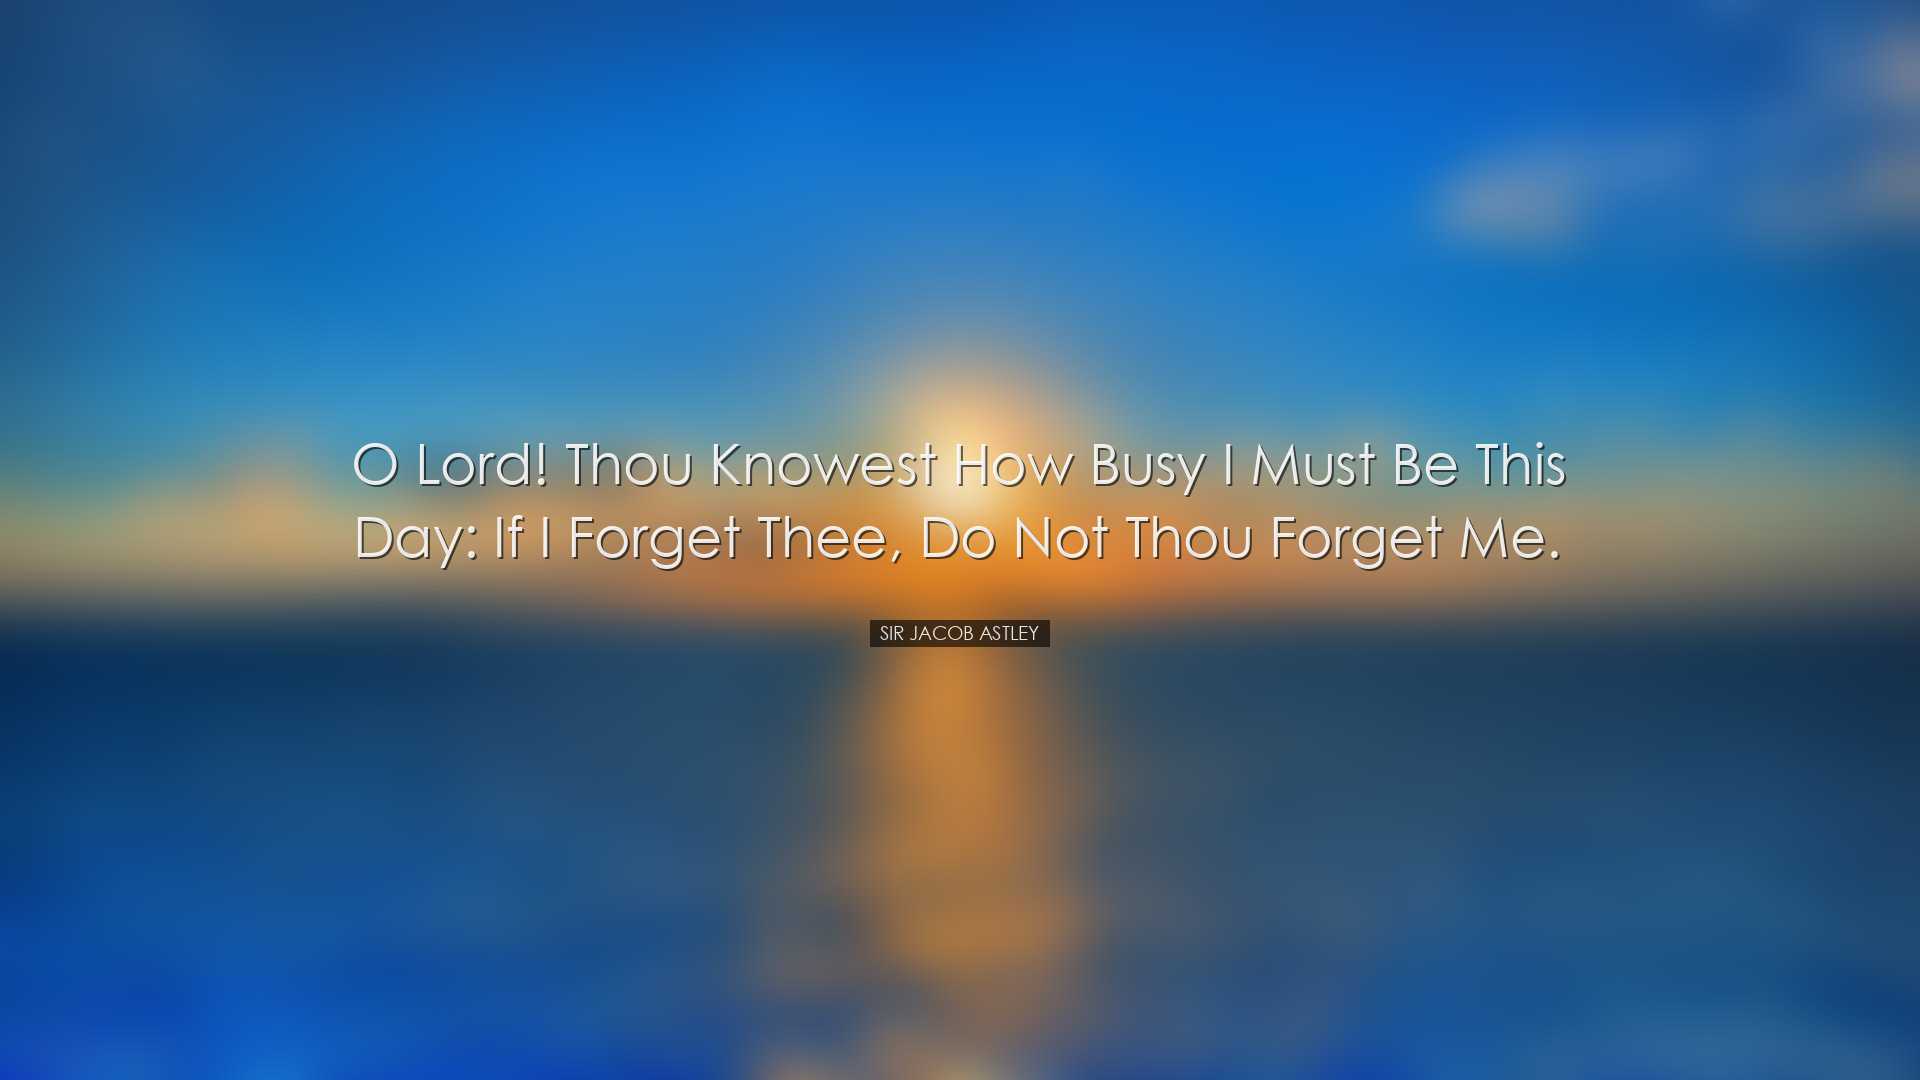 O Lord! thou knowest how busy I must be this day: if I forget thee